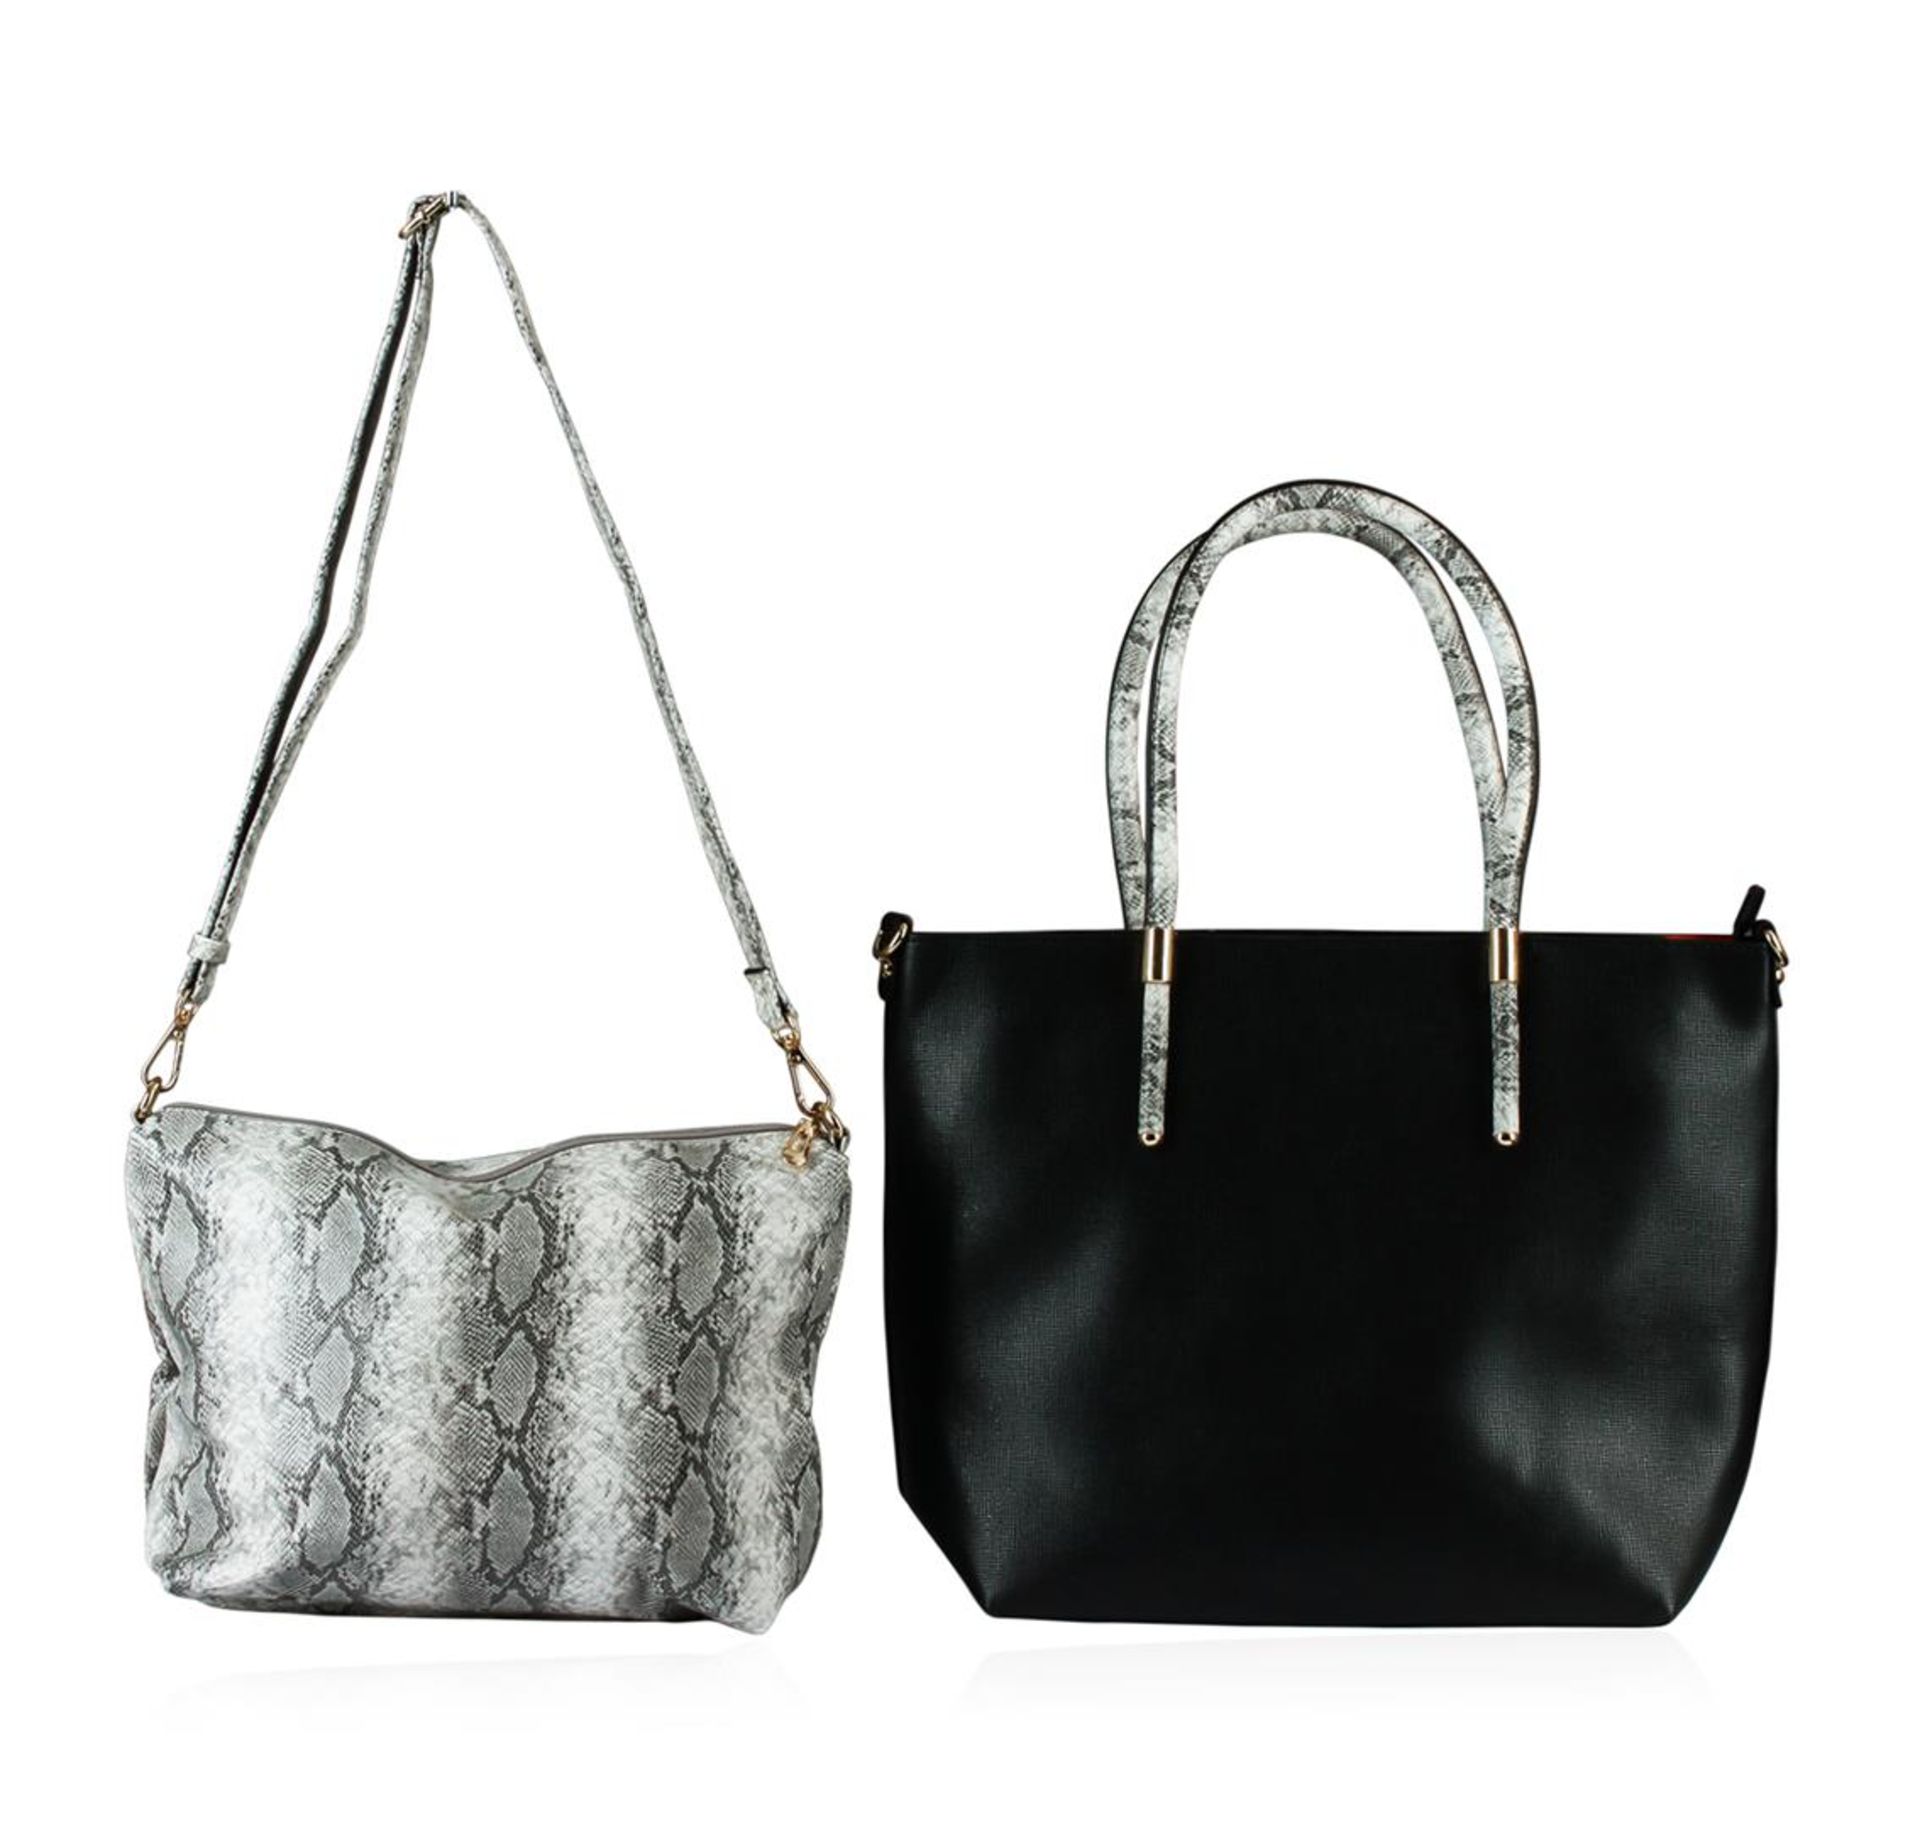 Black and Silver Textured Classic Handbag - Image 2 of 3